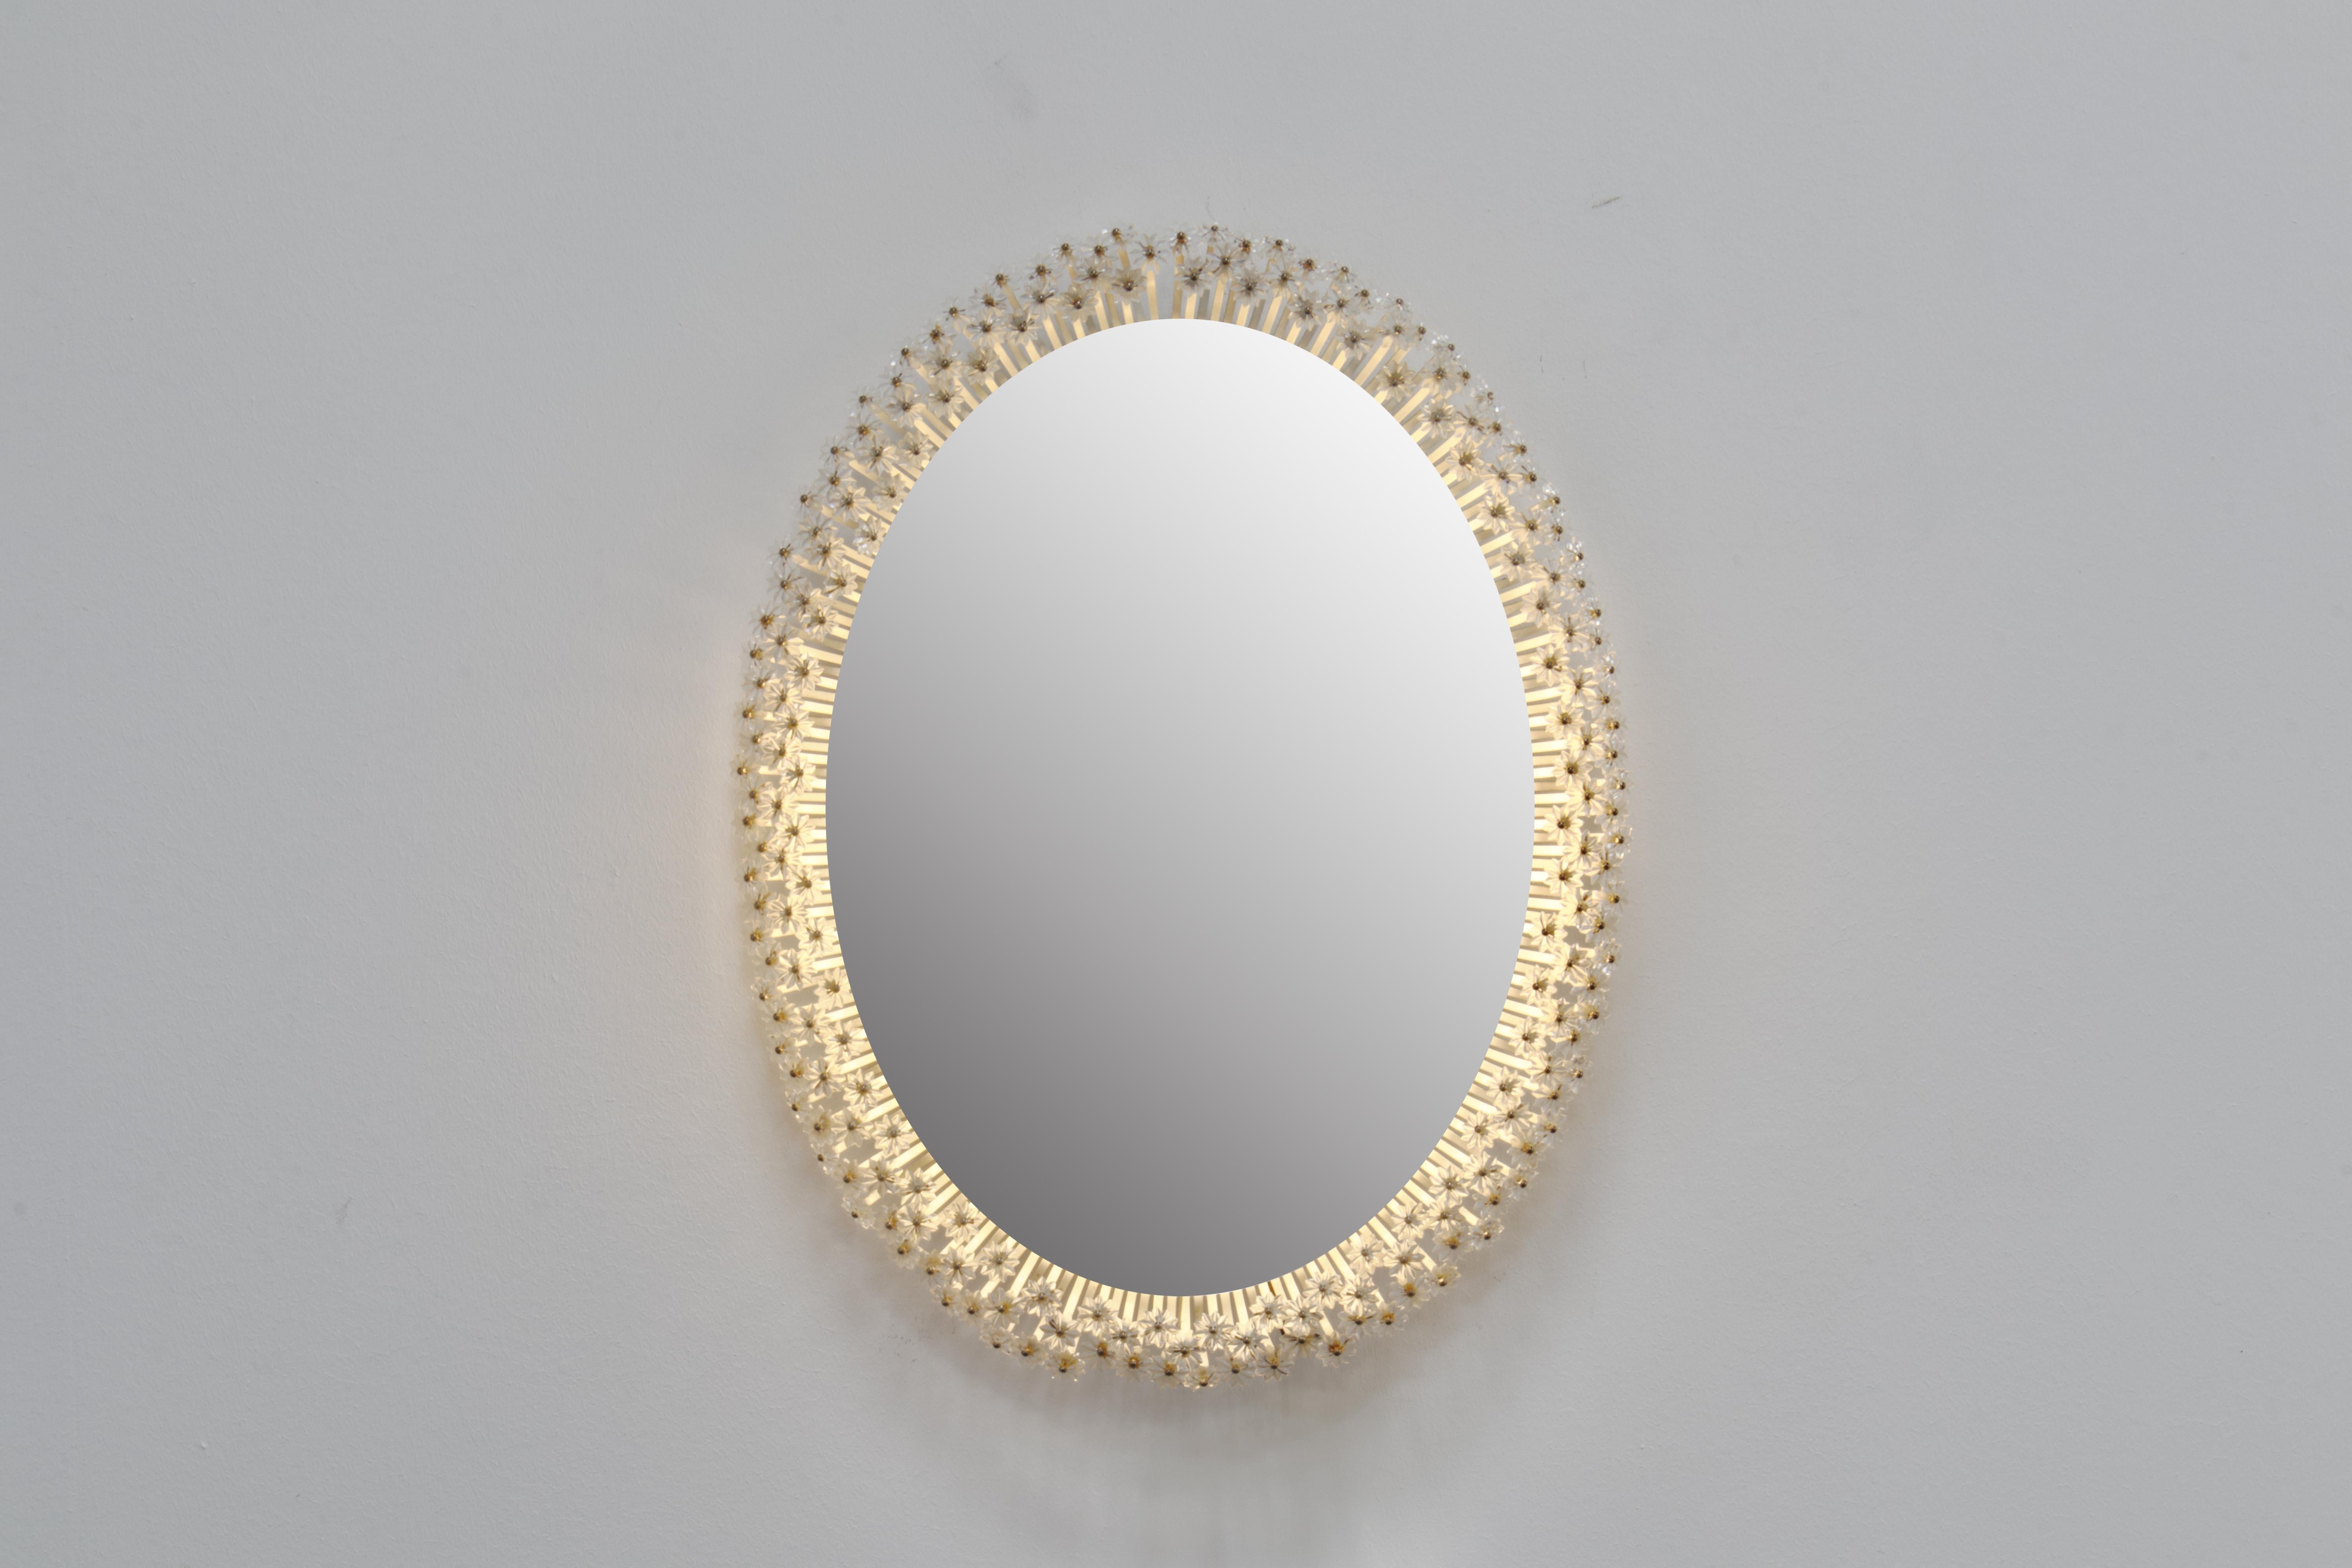 Stunningly beautiful backlit oval wall mirror with a halo of over 200 crystals dispersing the light extraordinarily. Designed and made in 1950s Austria by Emil Steiner and Rupert Nikoll respectively.

The piece is constructed of an oval steel plate,